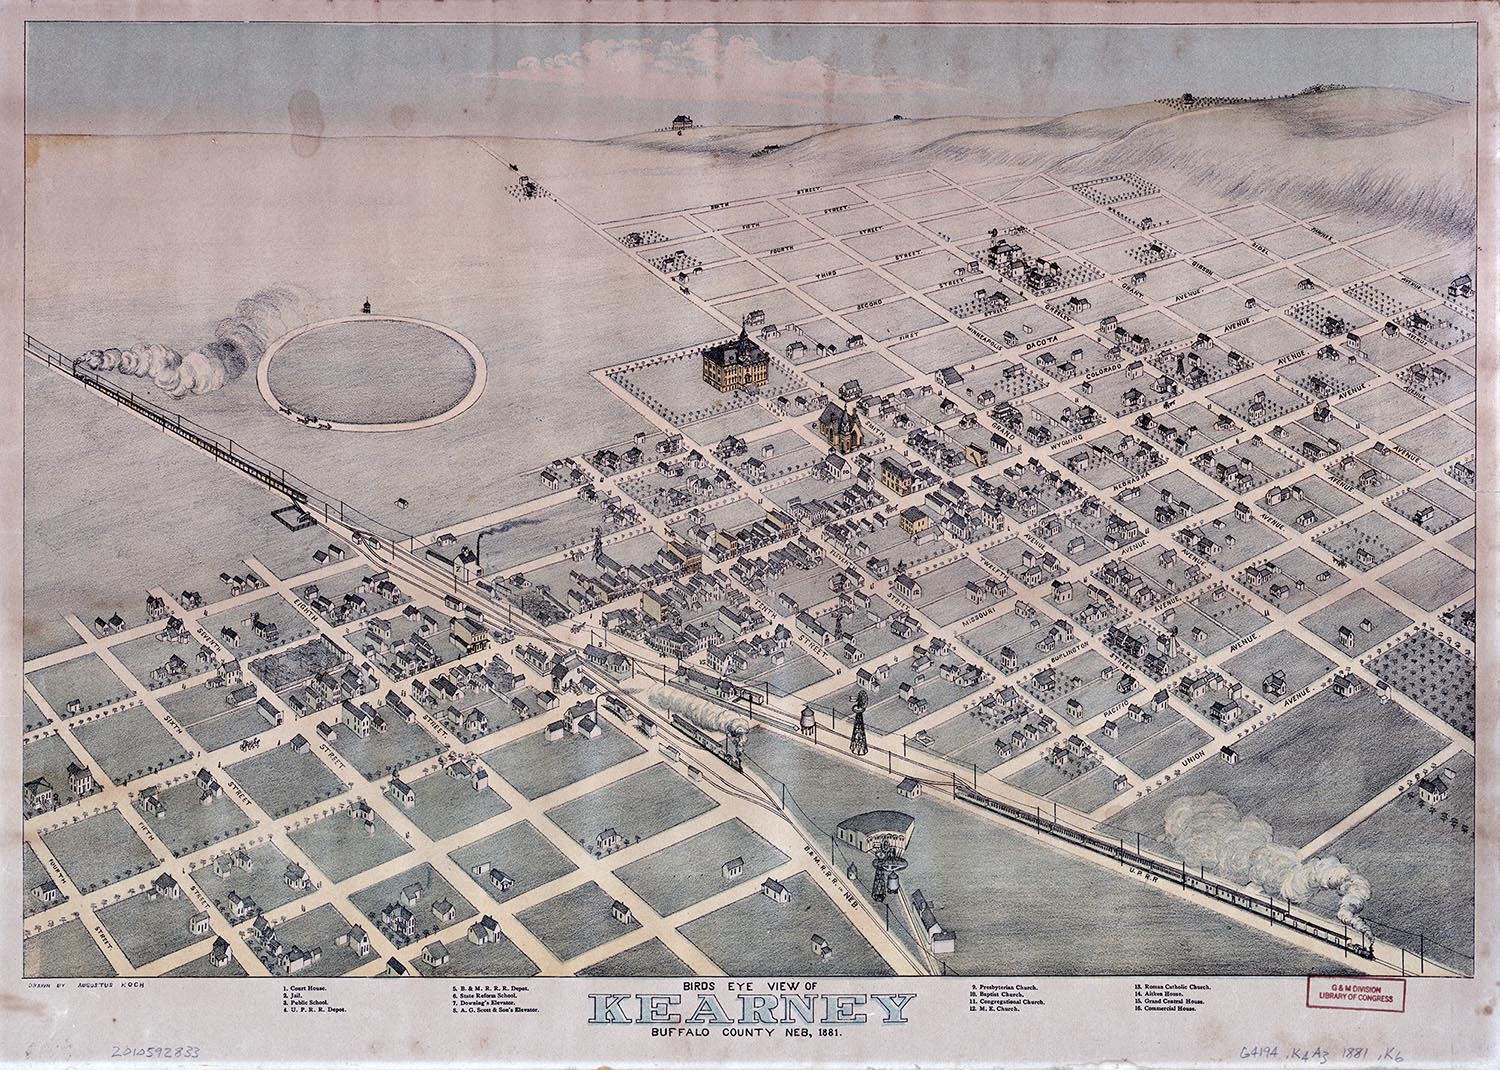 This illustration provides an aerial view of Kearney in 1881. (Library of Congress)